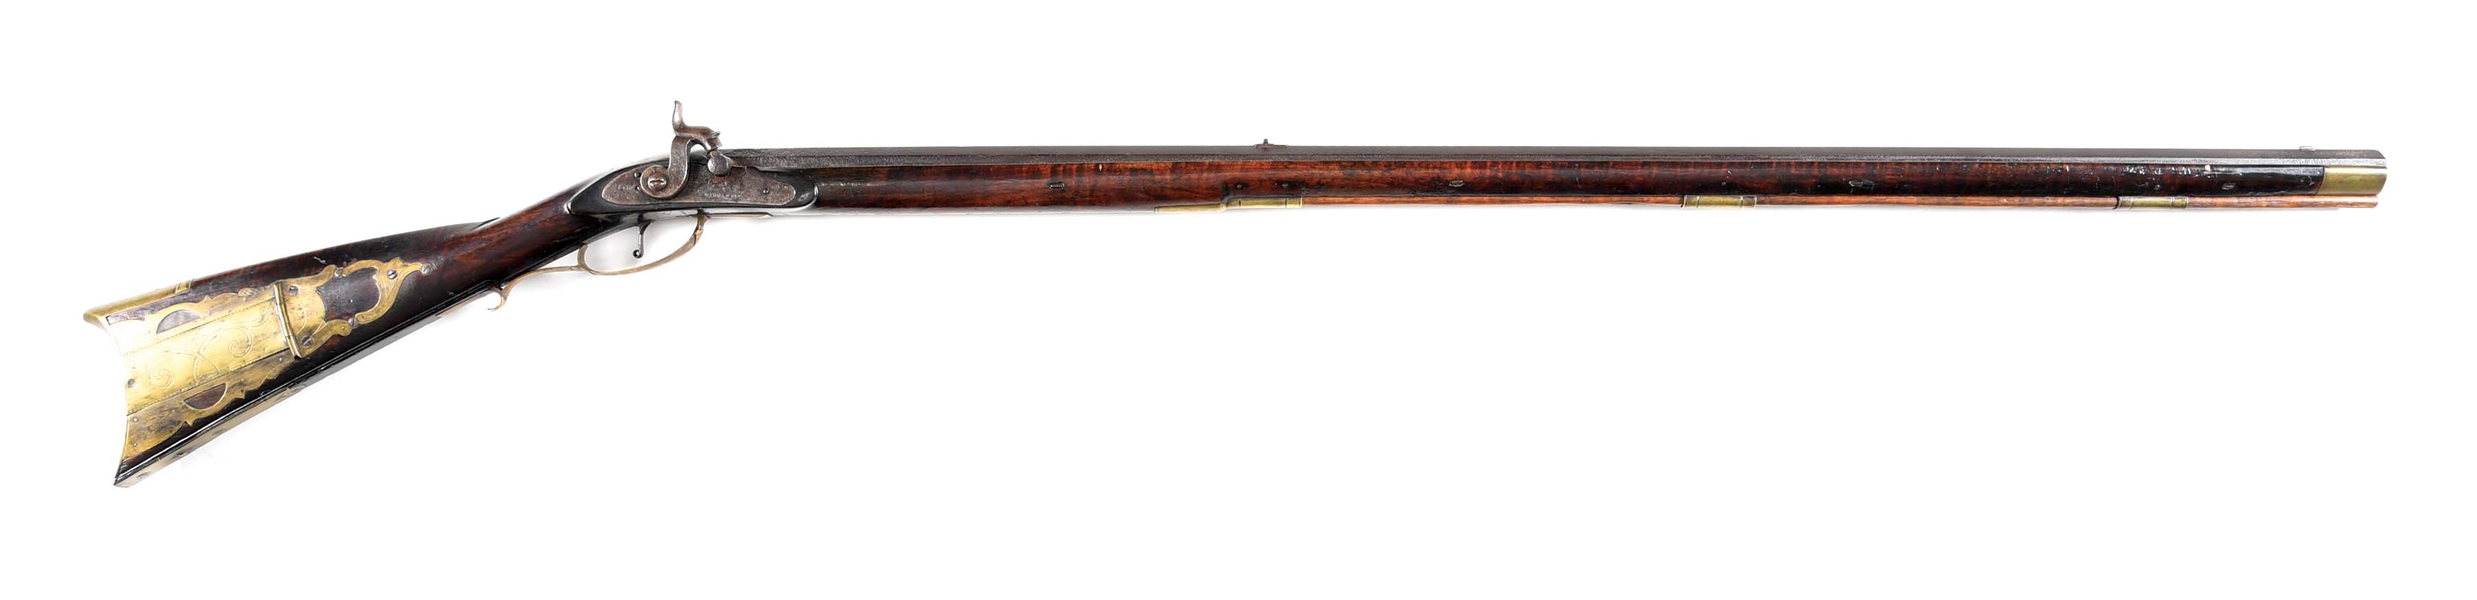 (A) PERIOD RESTOCKED PERCUSSION KENTUCKY RIFLE WITH ARMSTRONG PARTS.